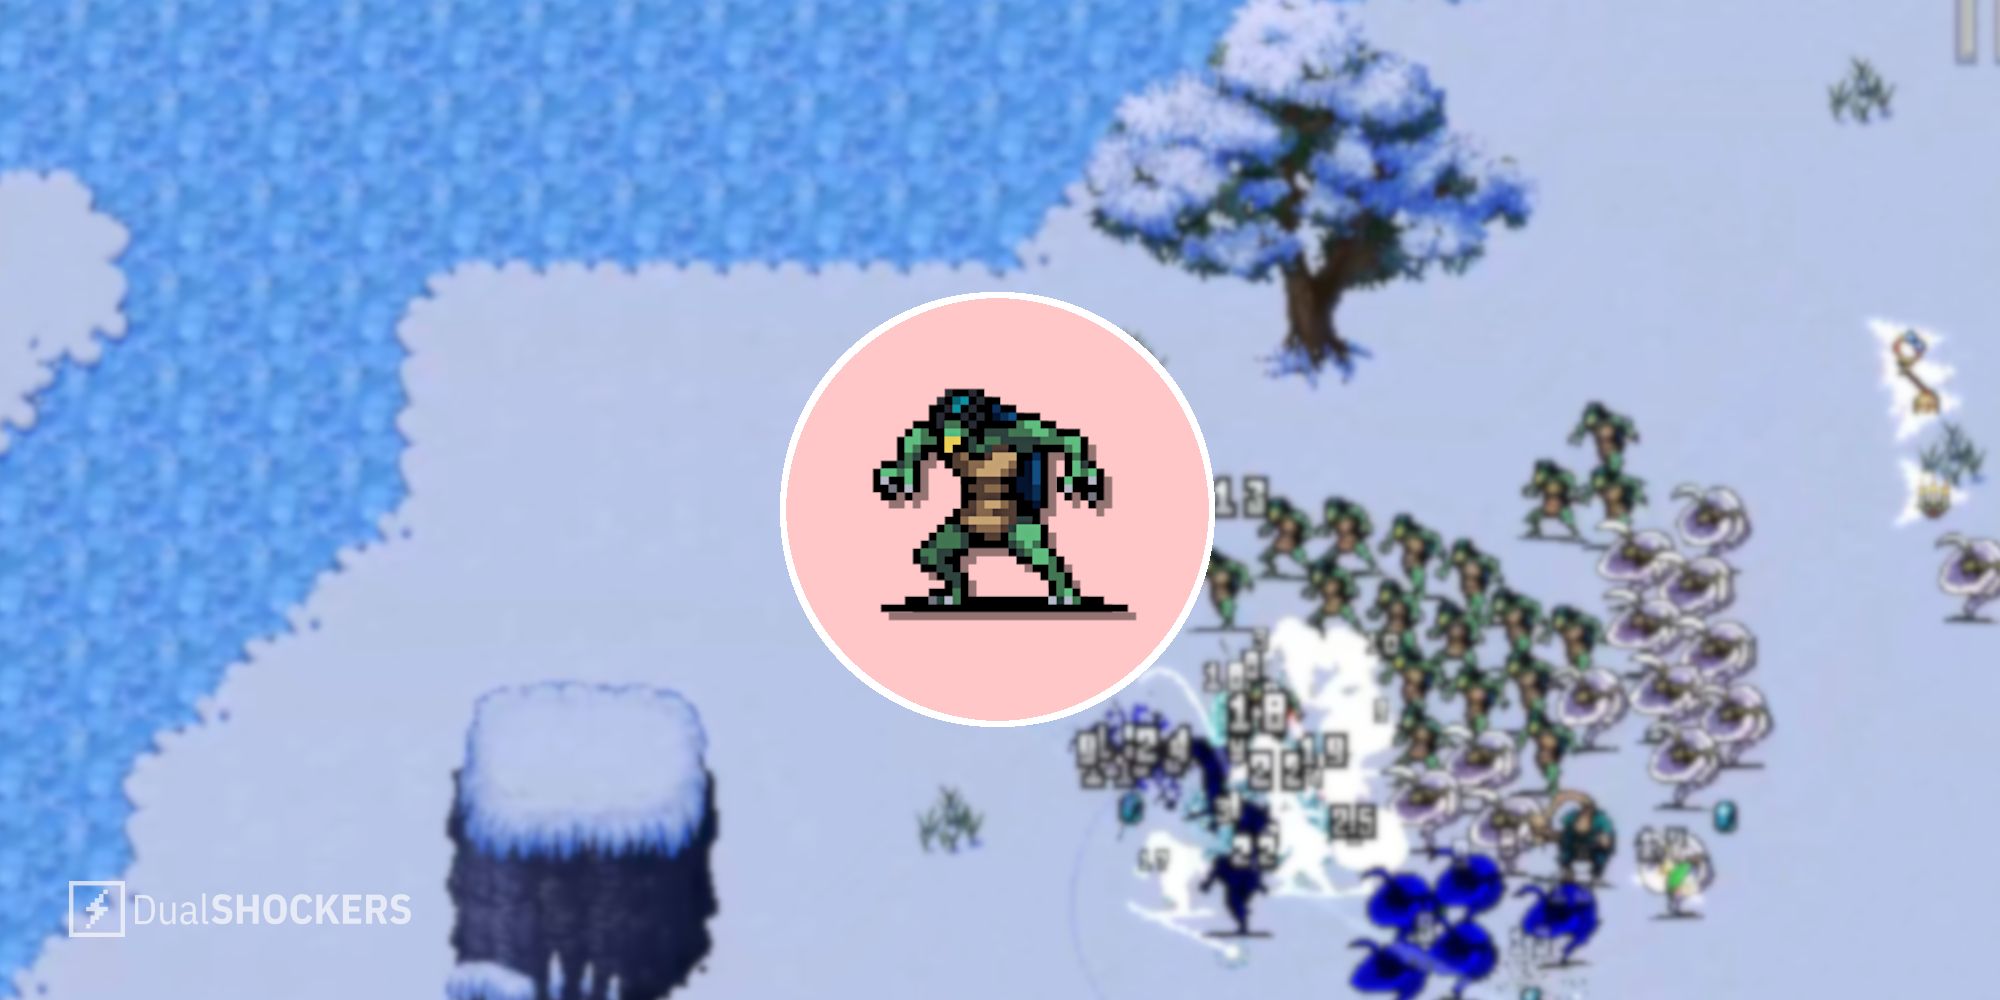 Split image of gameplay in the background and a Kappa enemy in the foreground from Vampire Survivors.